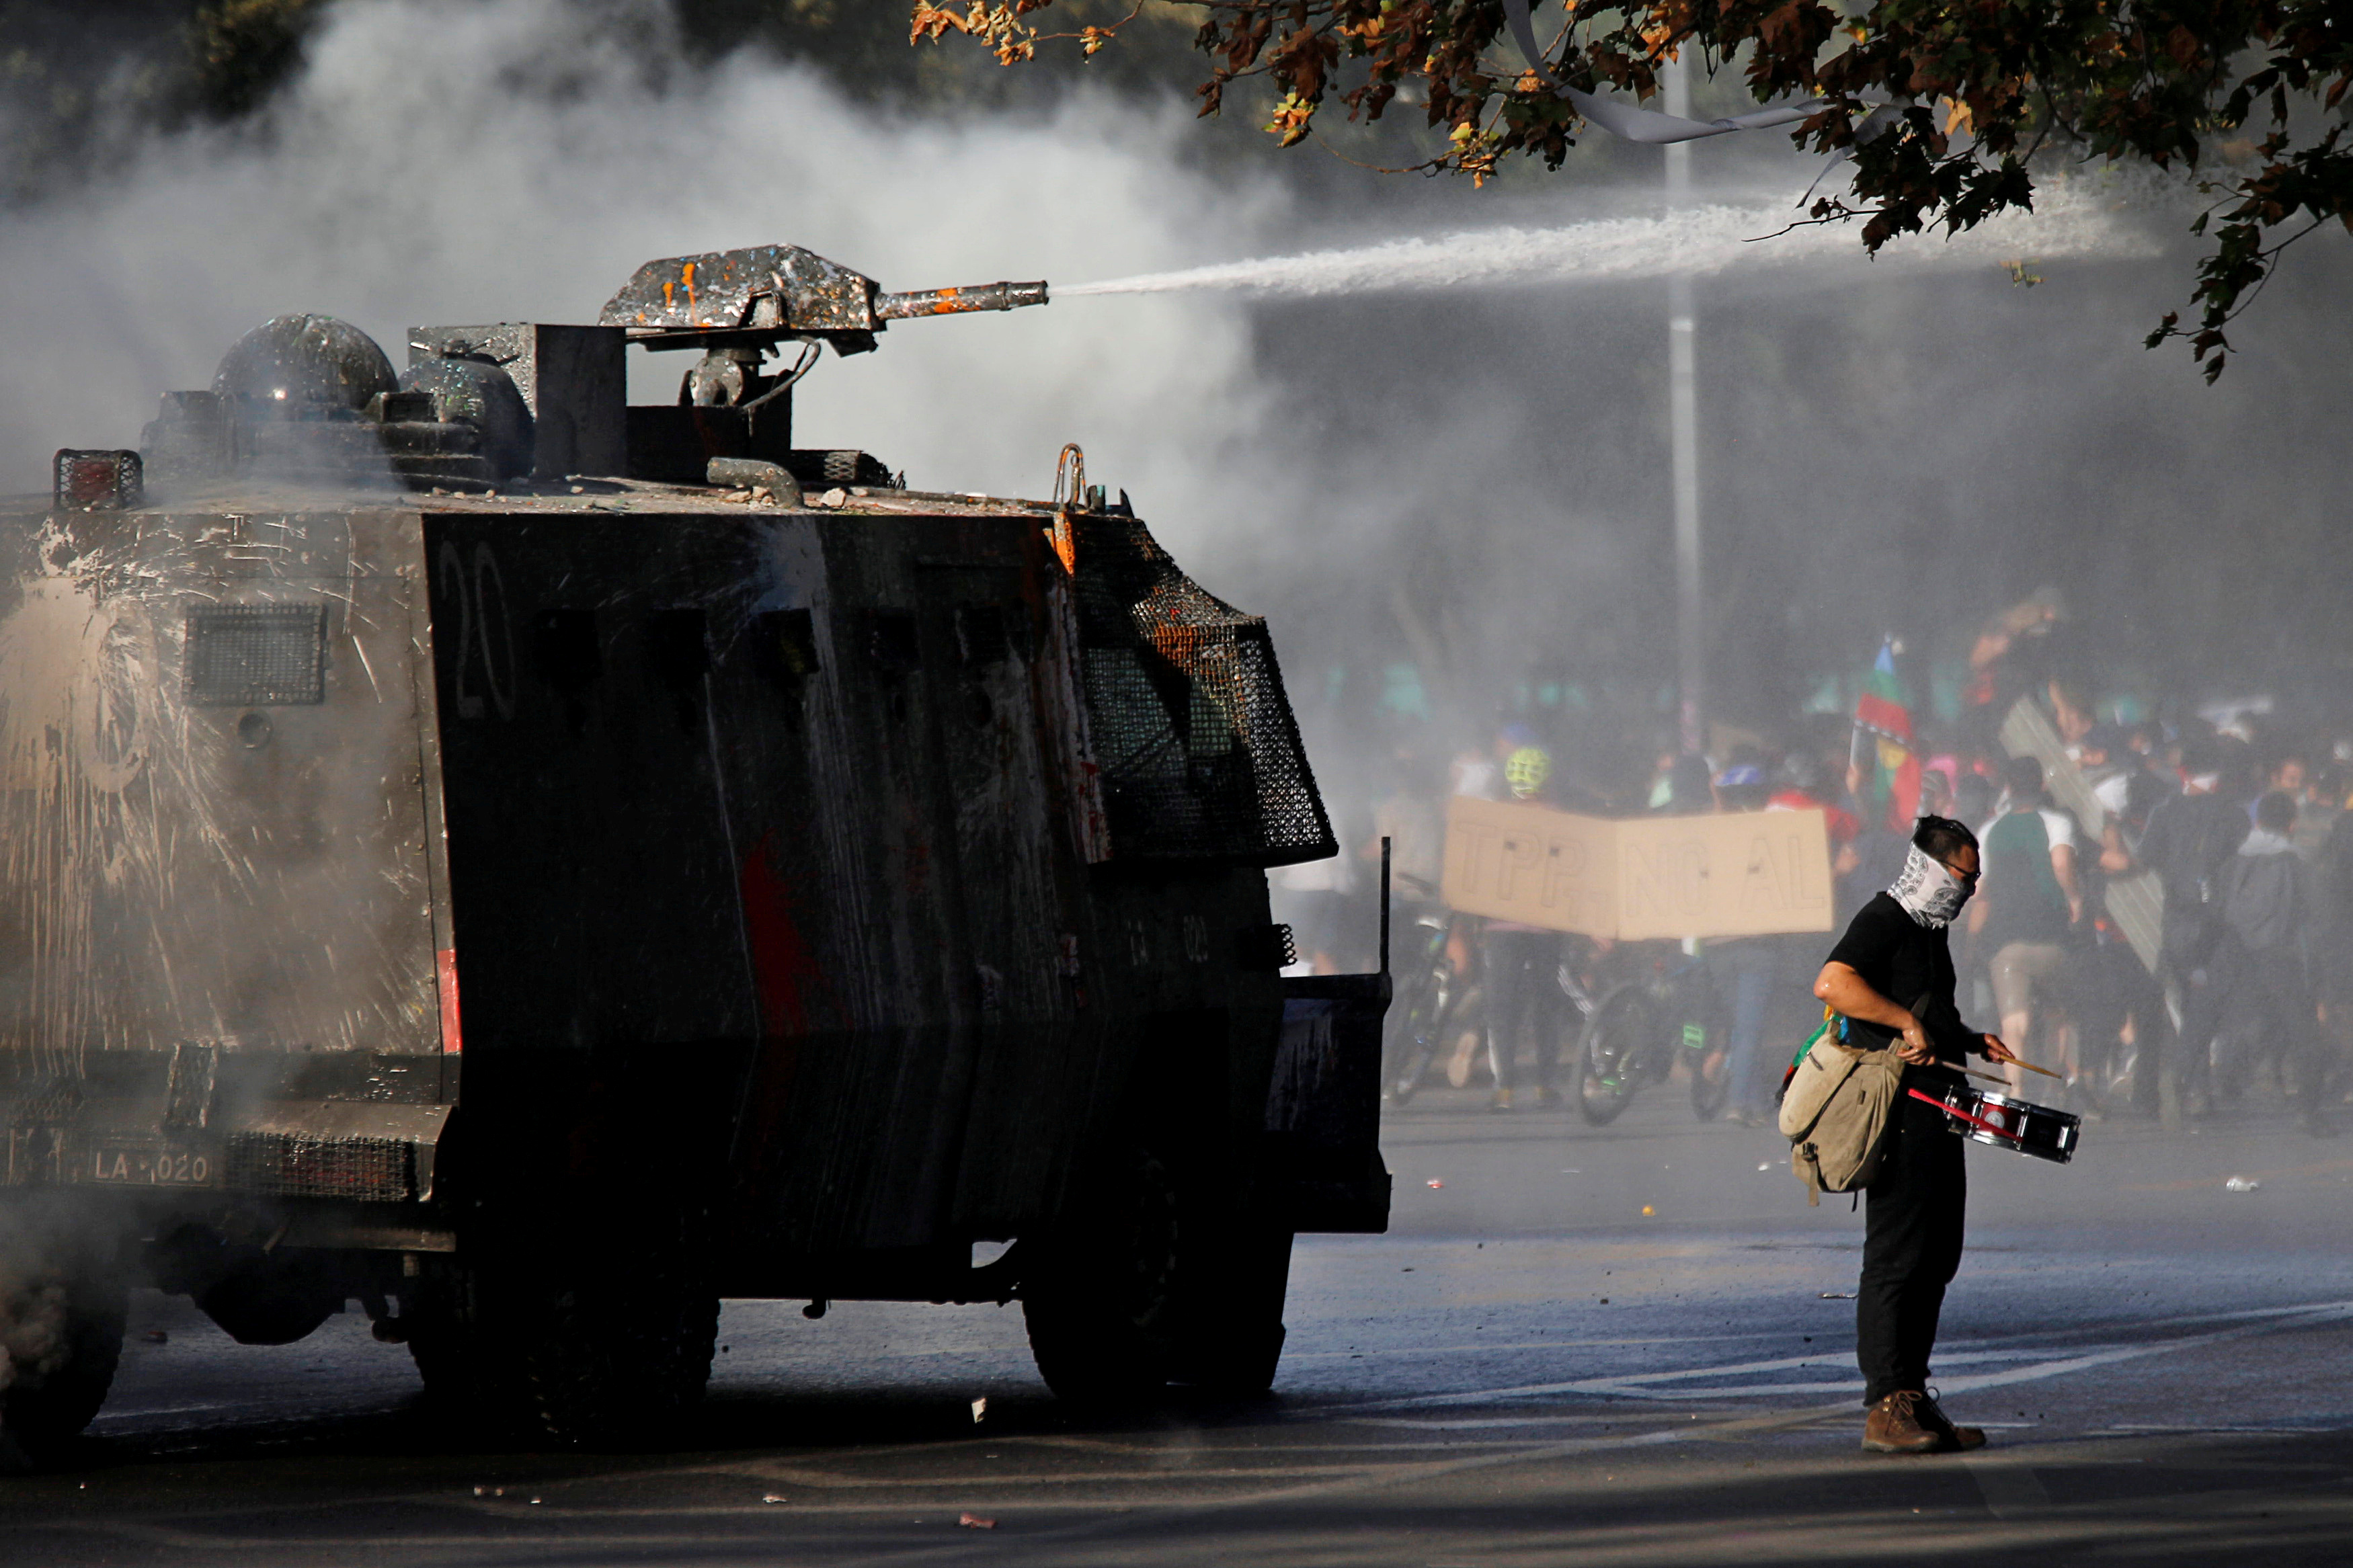 A demonstrator plays the drum as a police vehicle uses a water cannon during an anti-government protest in Santiago, Chile October 30, 2019. (Edgard Garrido/Reuters)